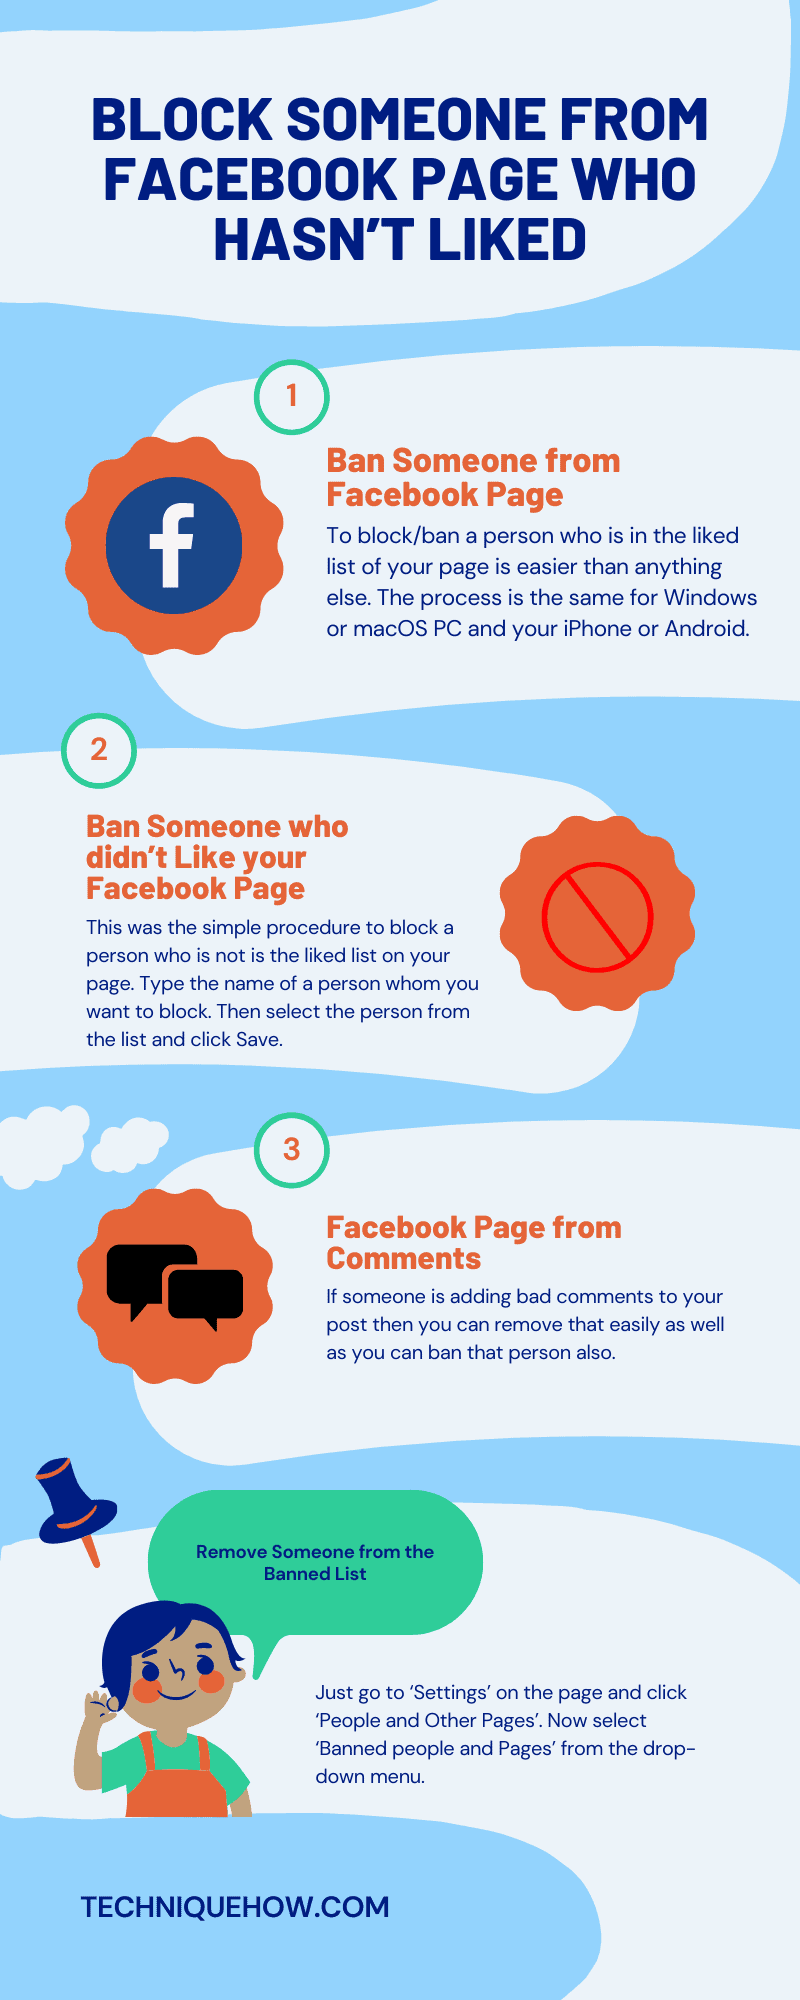 Infographic_Block Someone From Facebook page who hasn’t liked